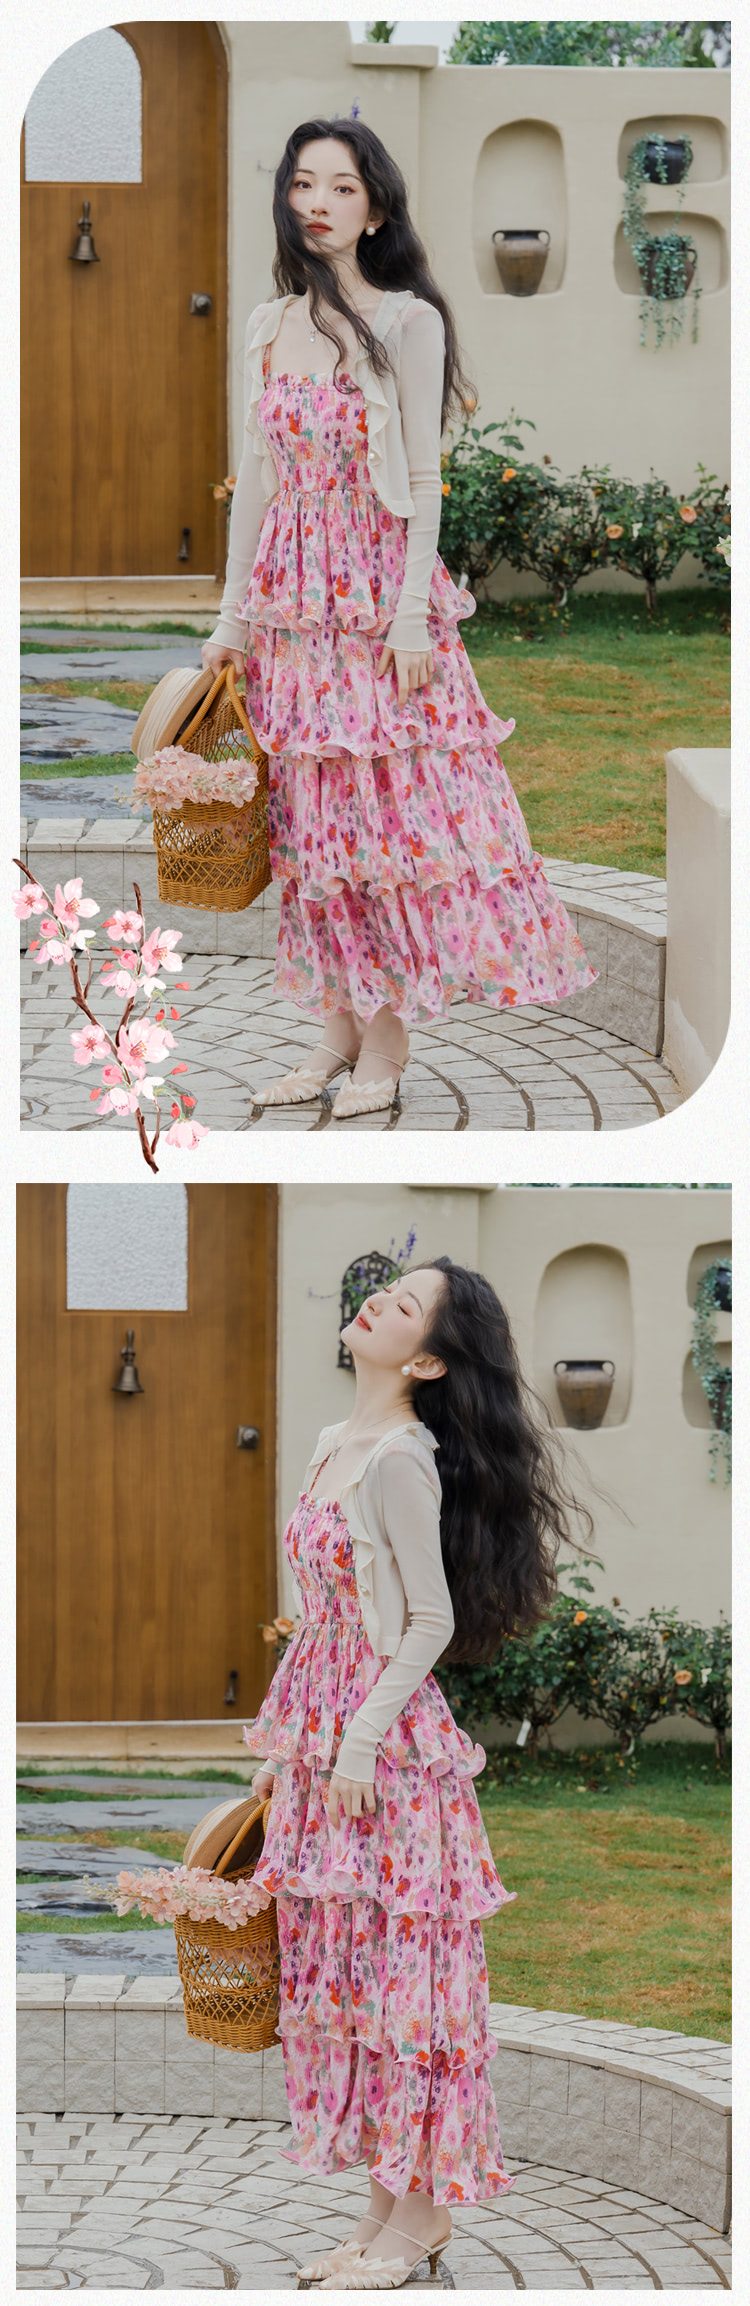 Romantic-Pink-Floral-Ruffle-Layered-Summer-Casual-Dress-with-Cardigan13